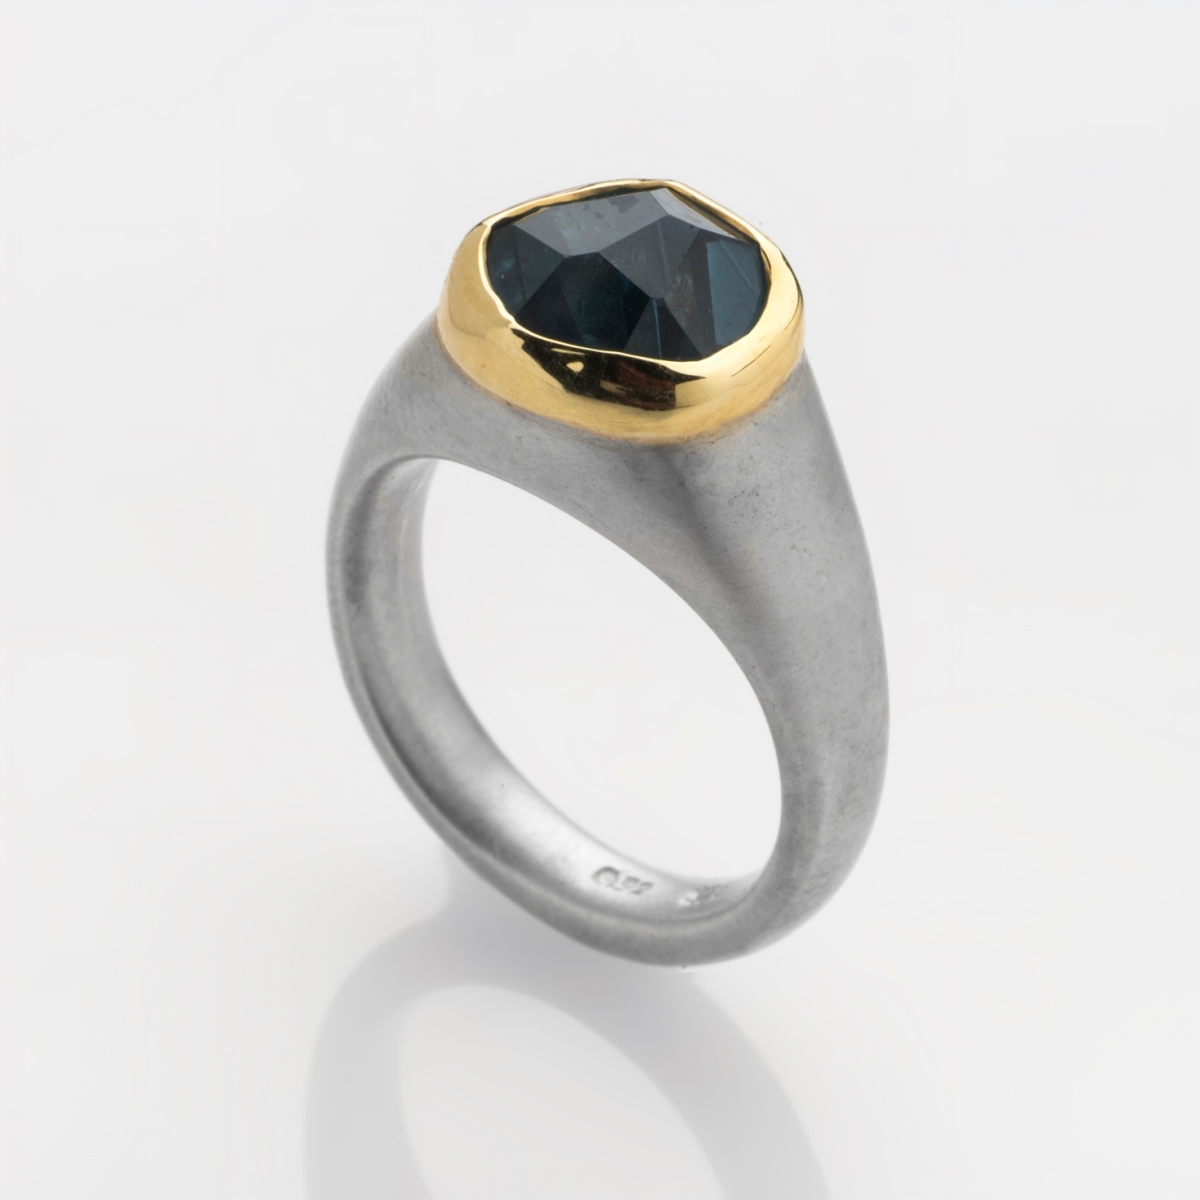 Blue Topaz, Silver & Gold ring